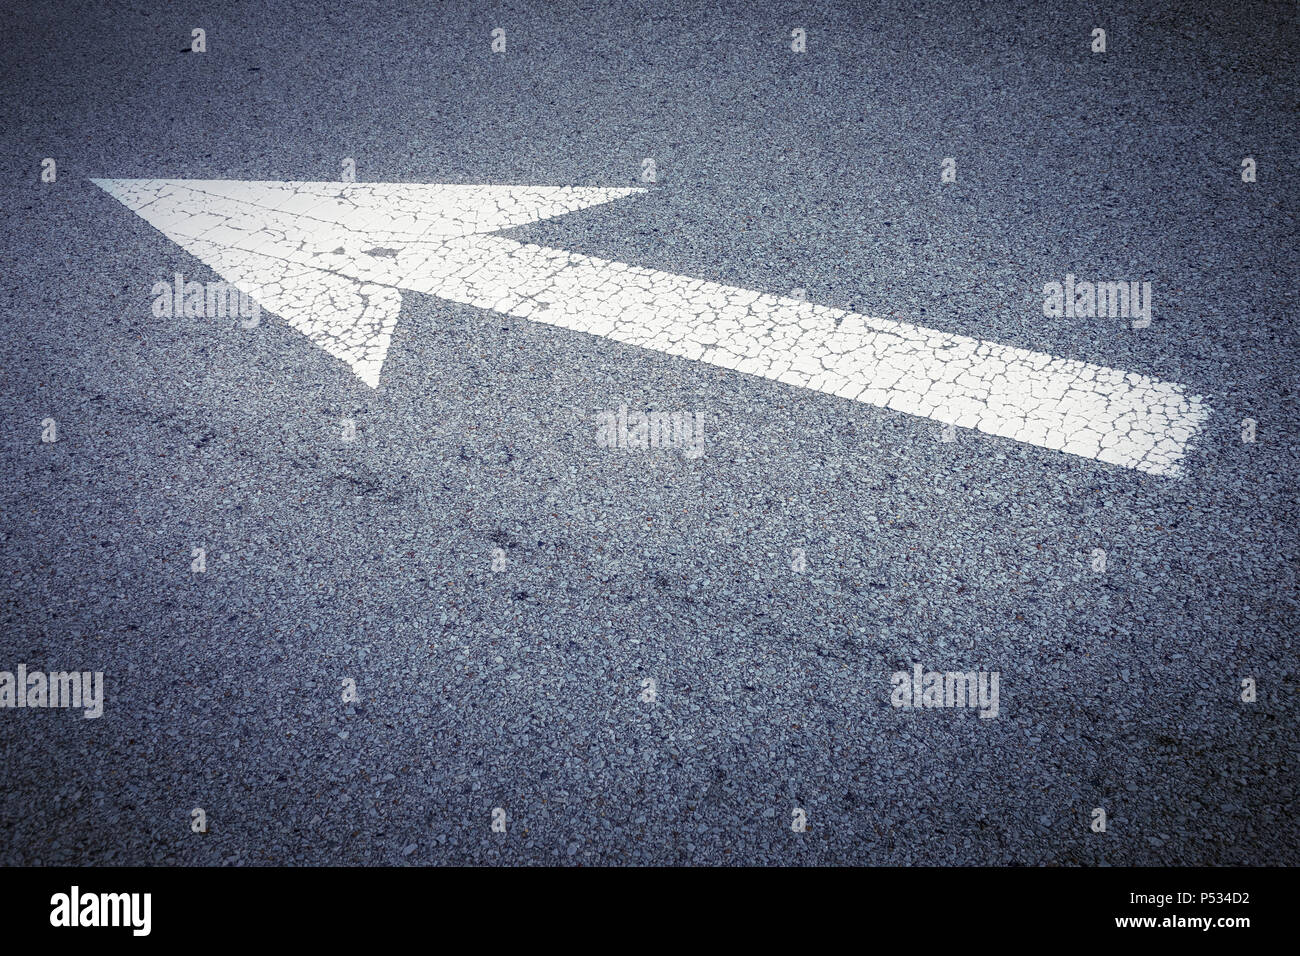 an image of an arrow sign on the road Stock Photo